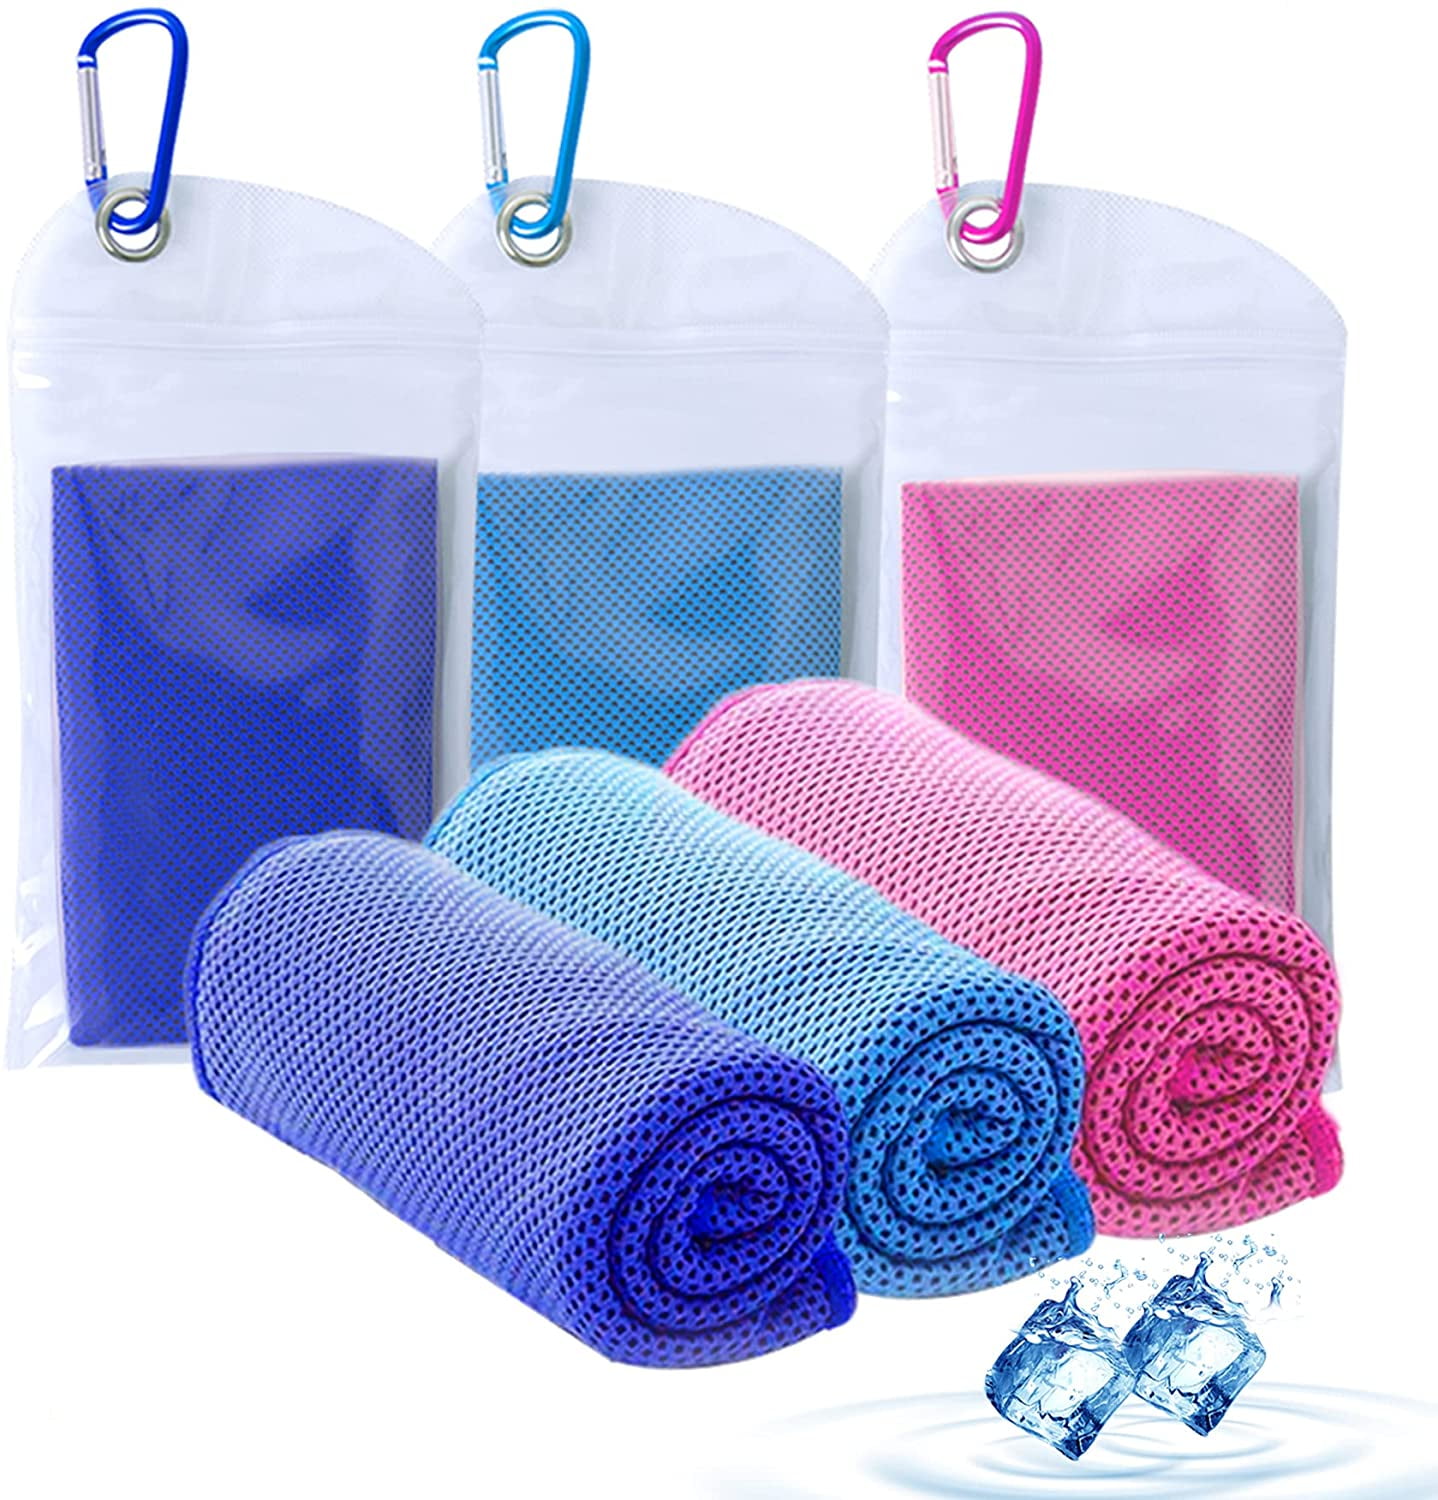 4pack Sports Cooling Towel for Instant Cooling Relief,100% Microfiber Chilly Towel,Soft Breathable Ice Towel for Yoga Gym Camping